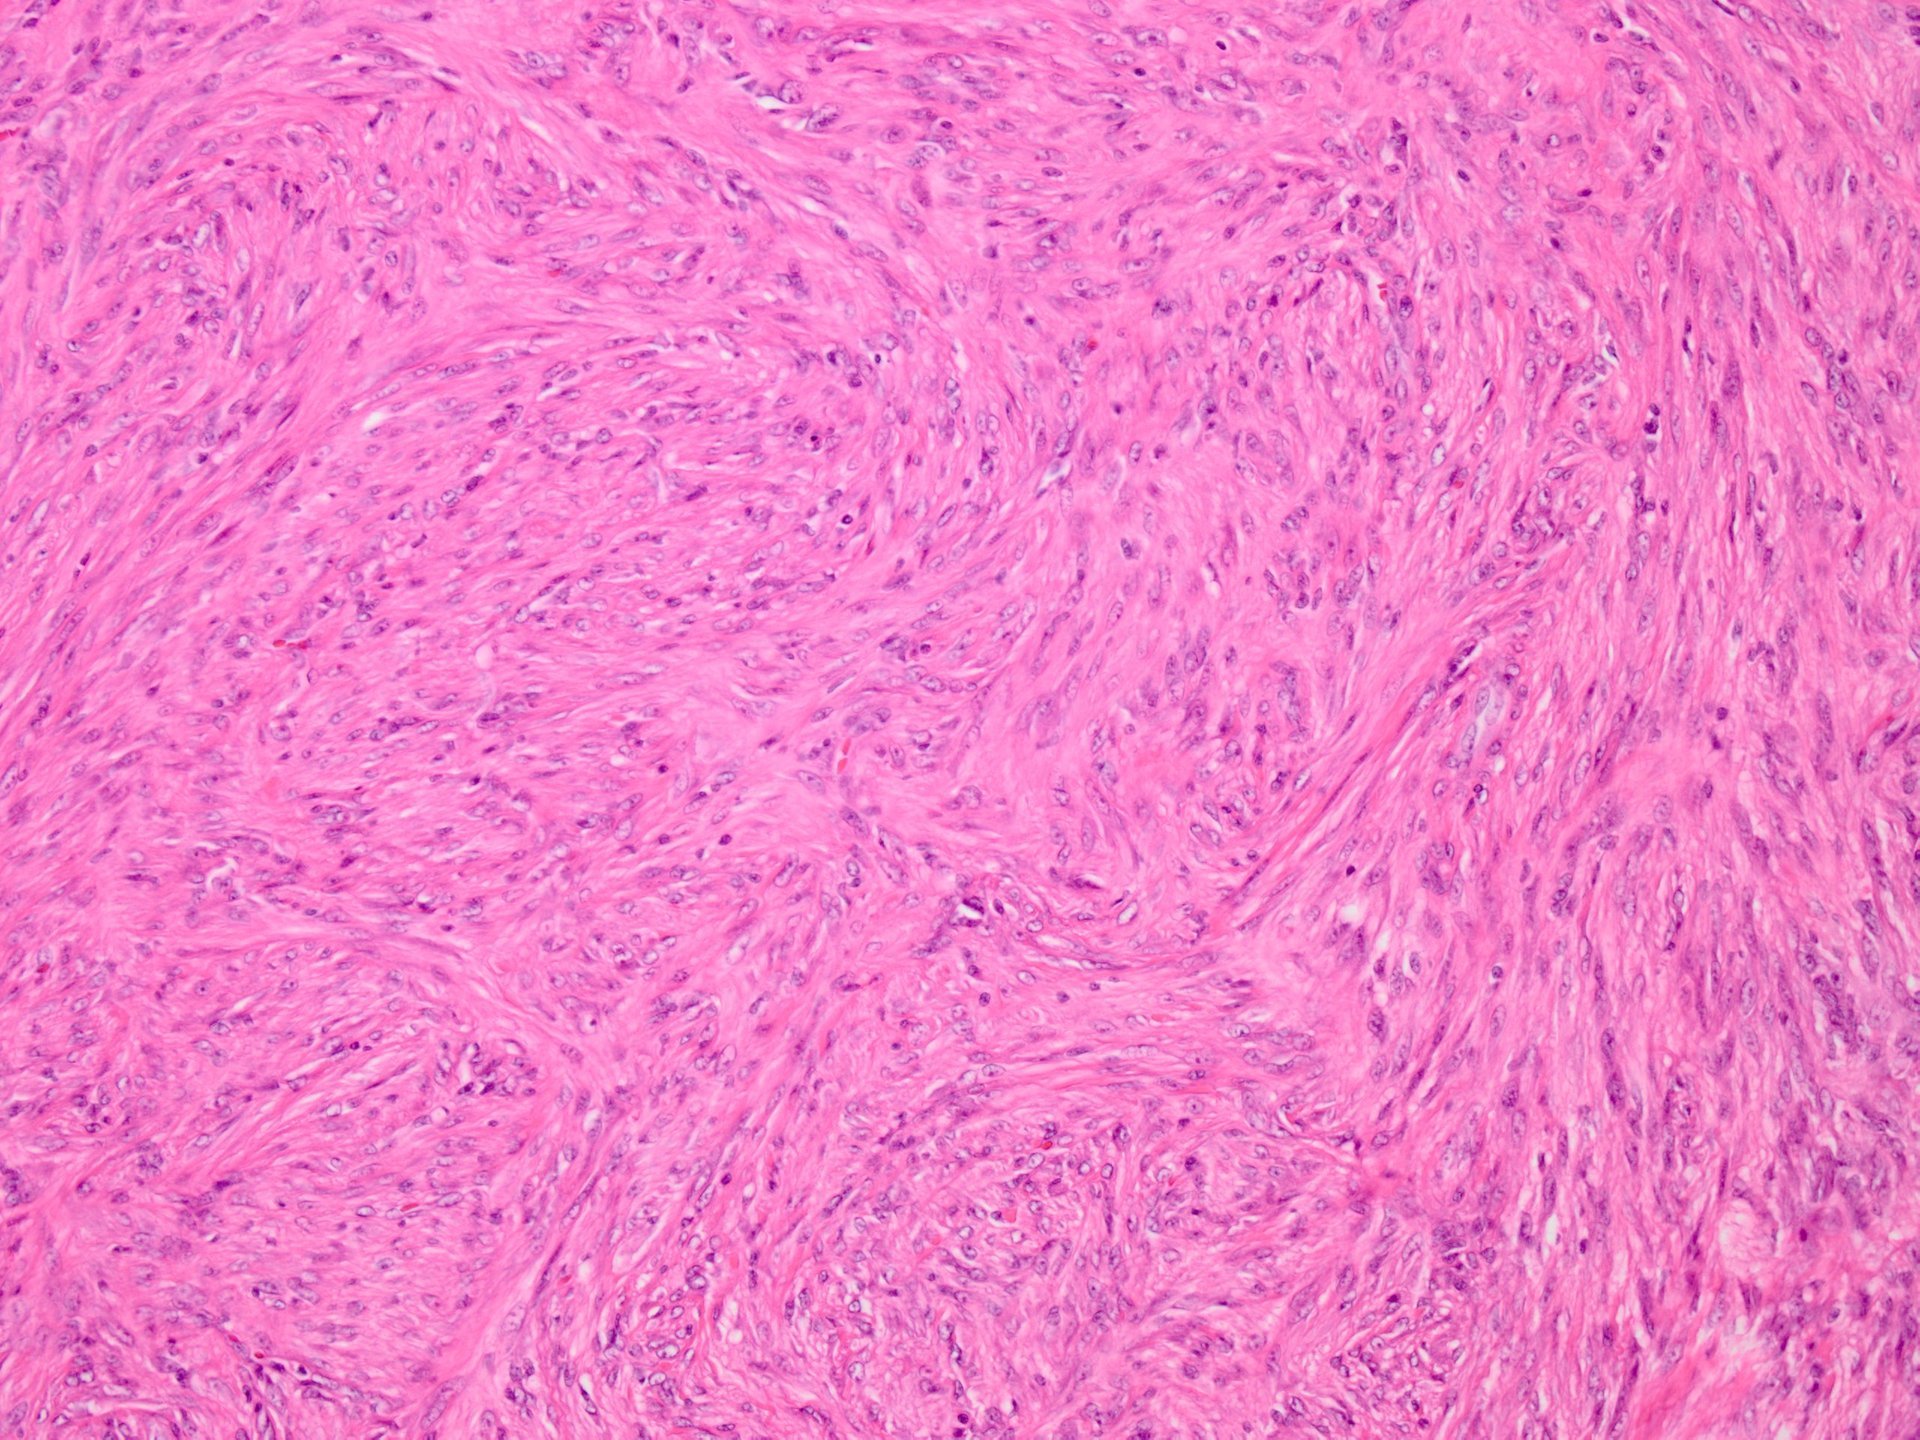 Atypical fibrous histiocytoma of the skin (atypical dermatofibroma 